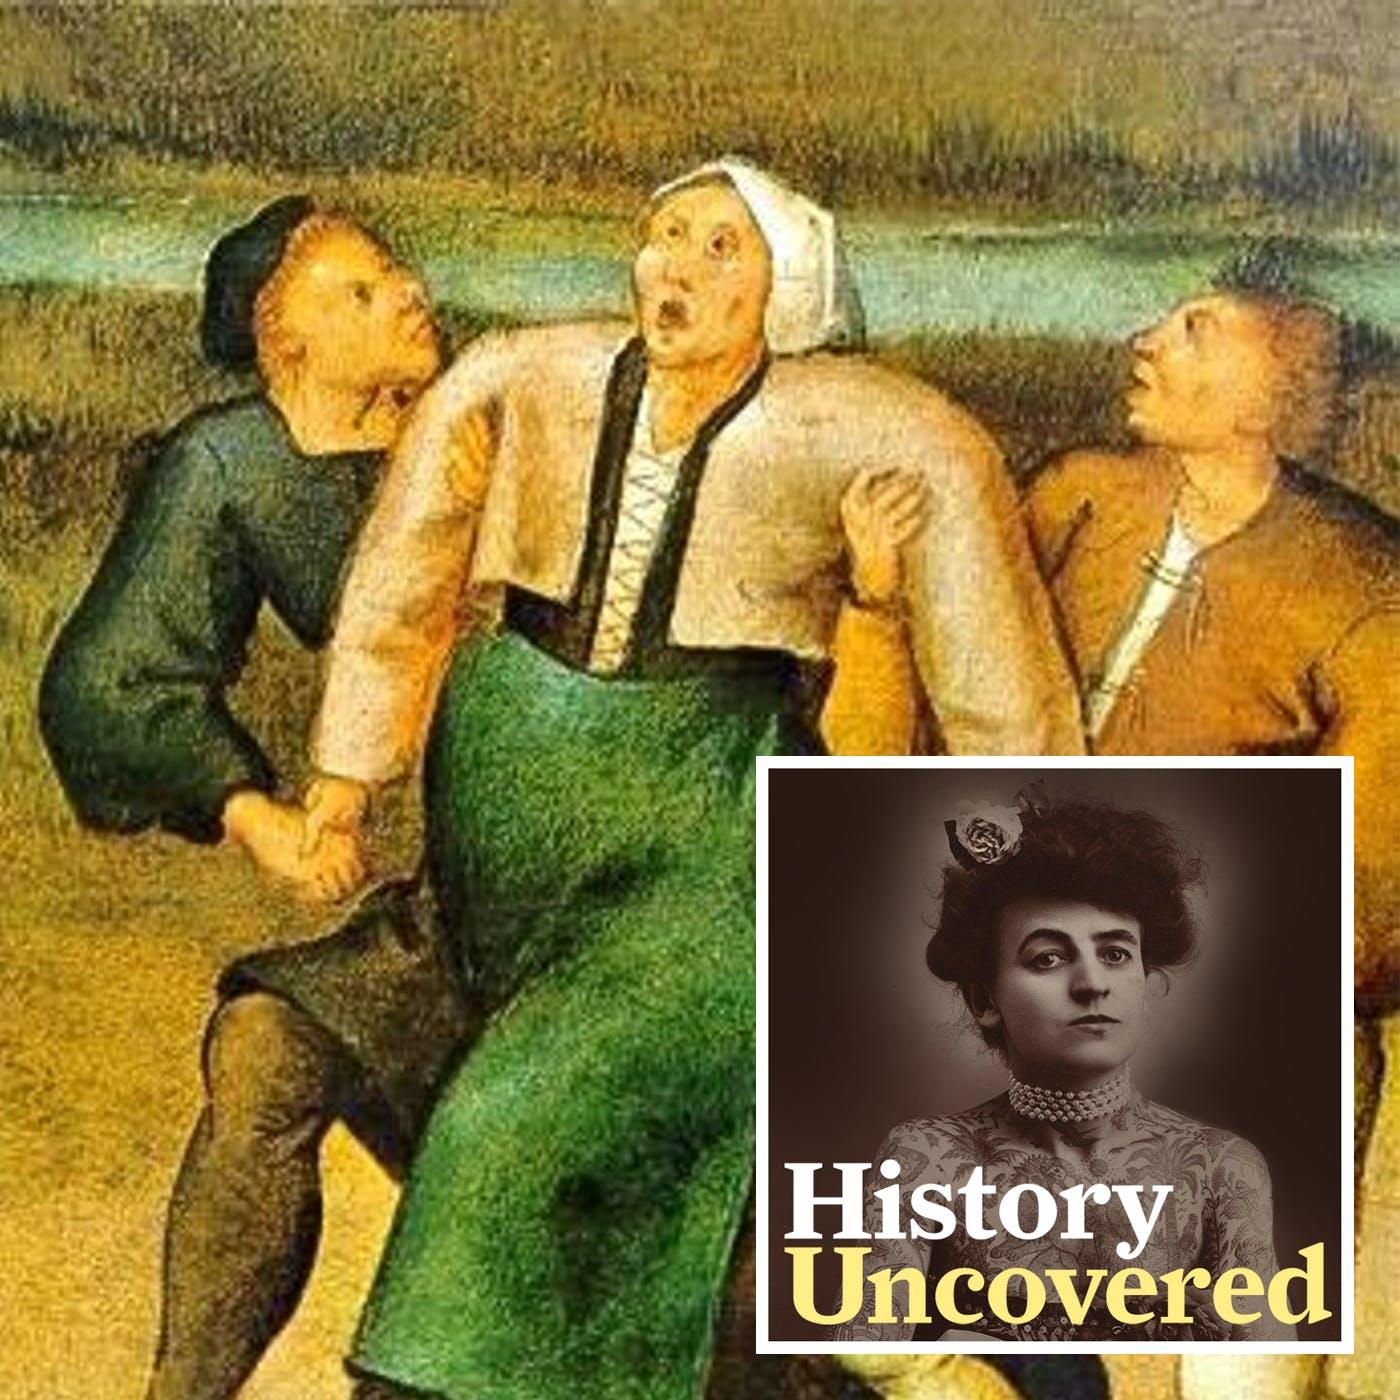 The Mysterious Dancing Plague Of 1518